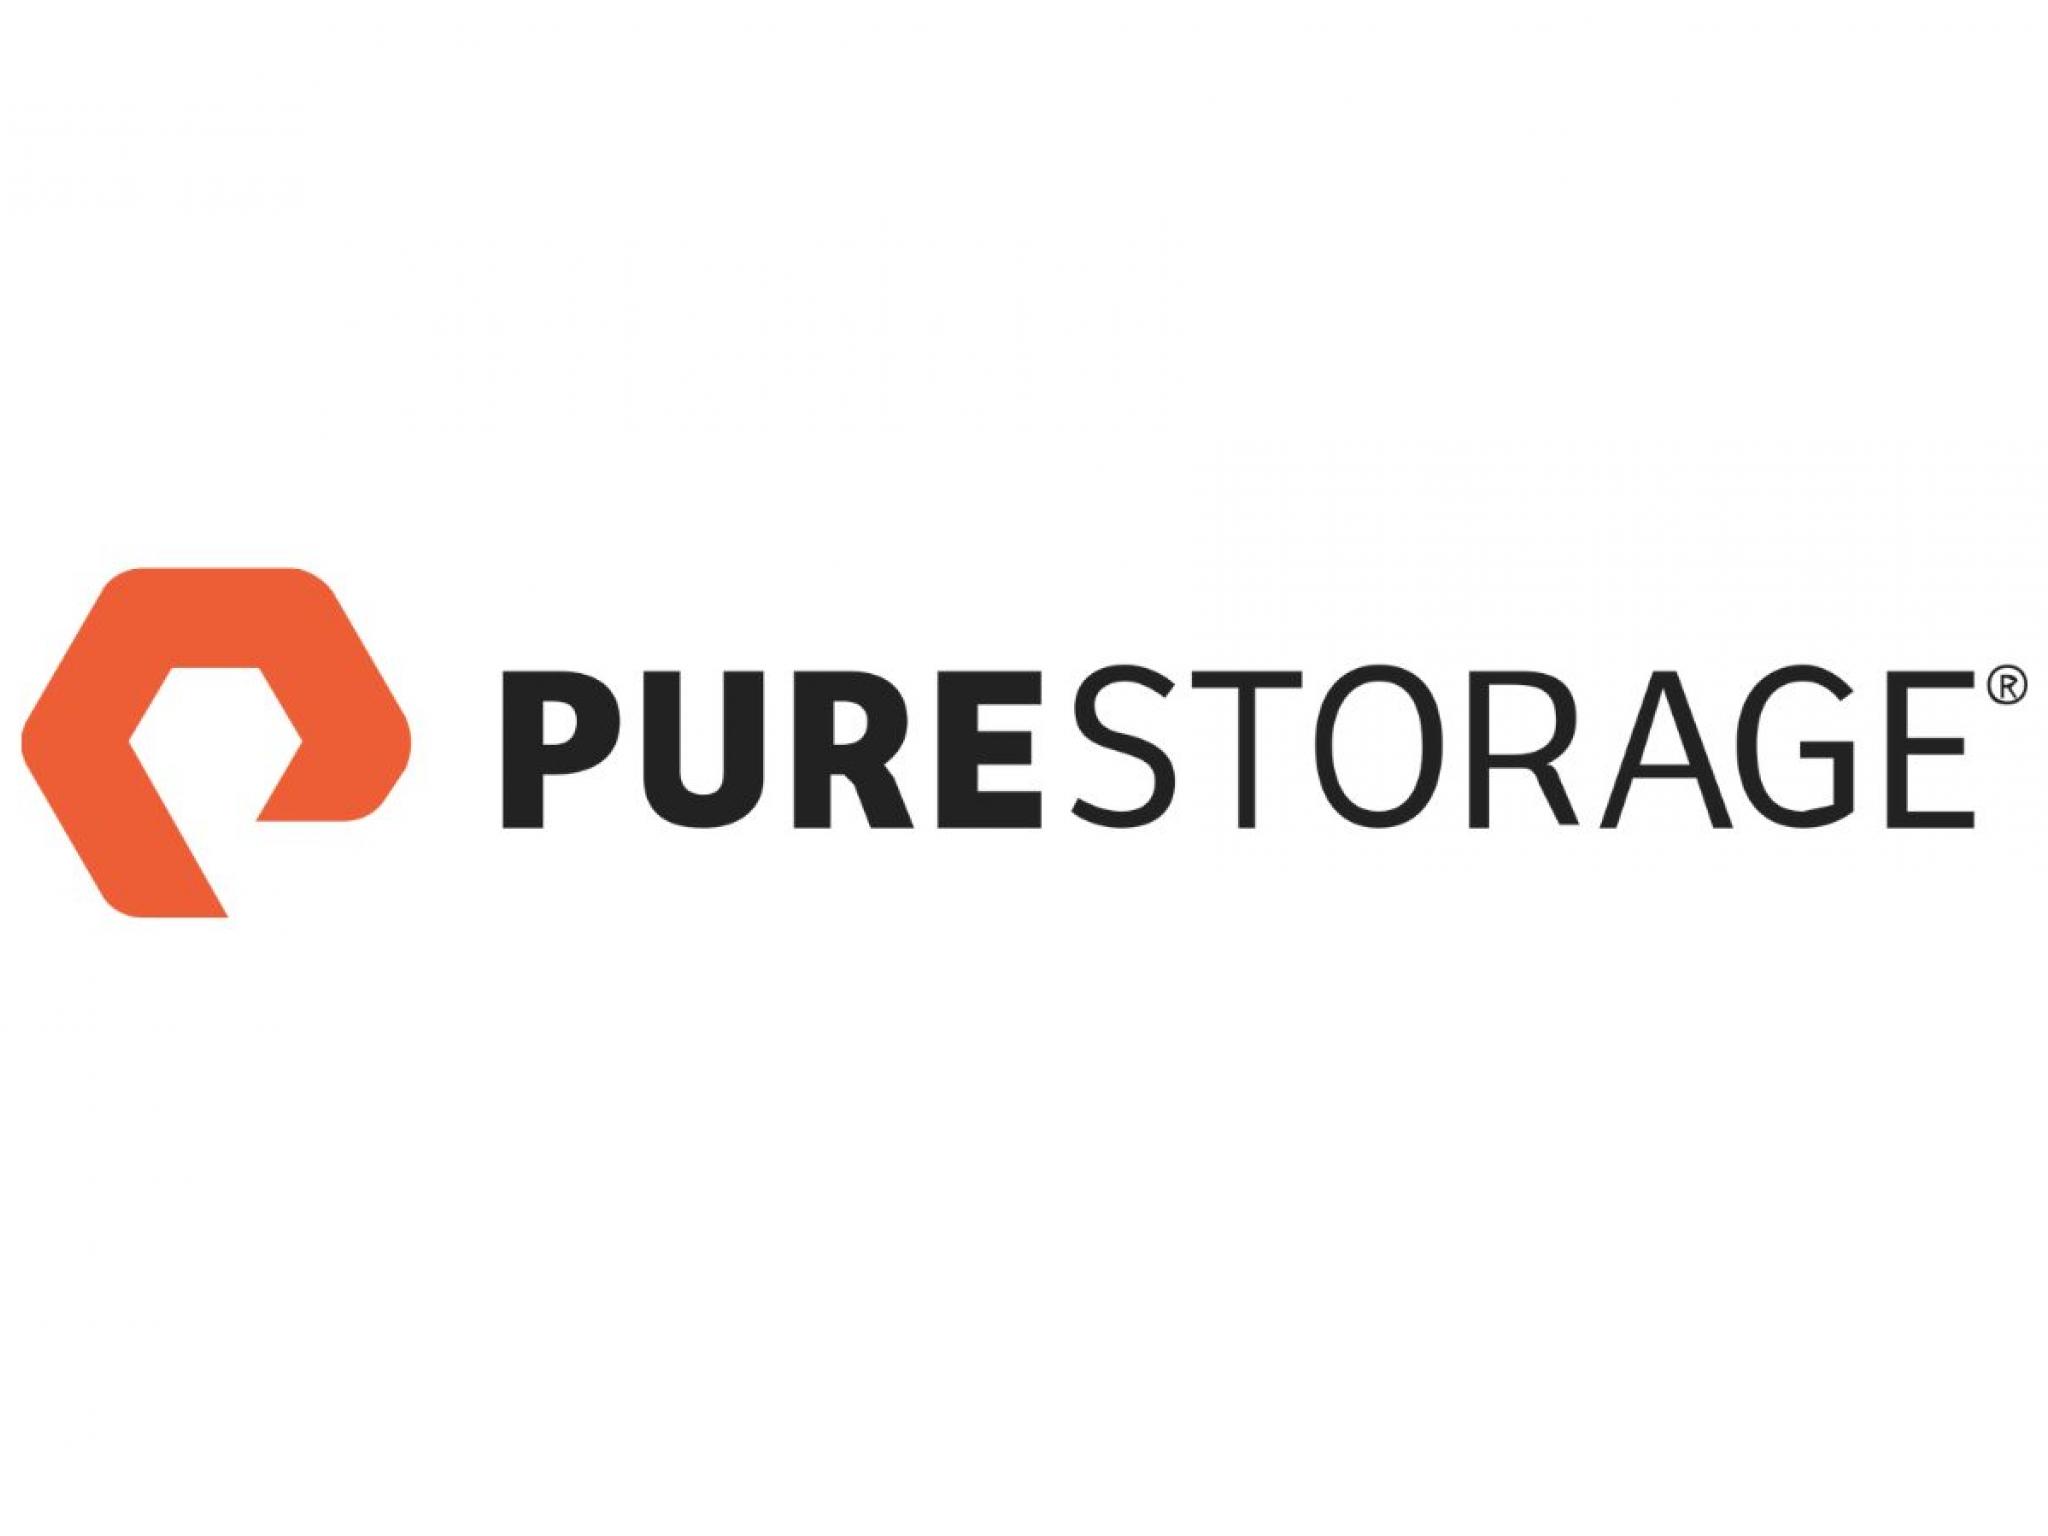  pure-storage-issues-weak-forecast-joins-frontline-weibo-and-other-big-stocks-moving-lower-in-thursdays-pre-market-session 